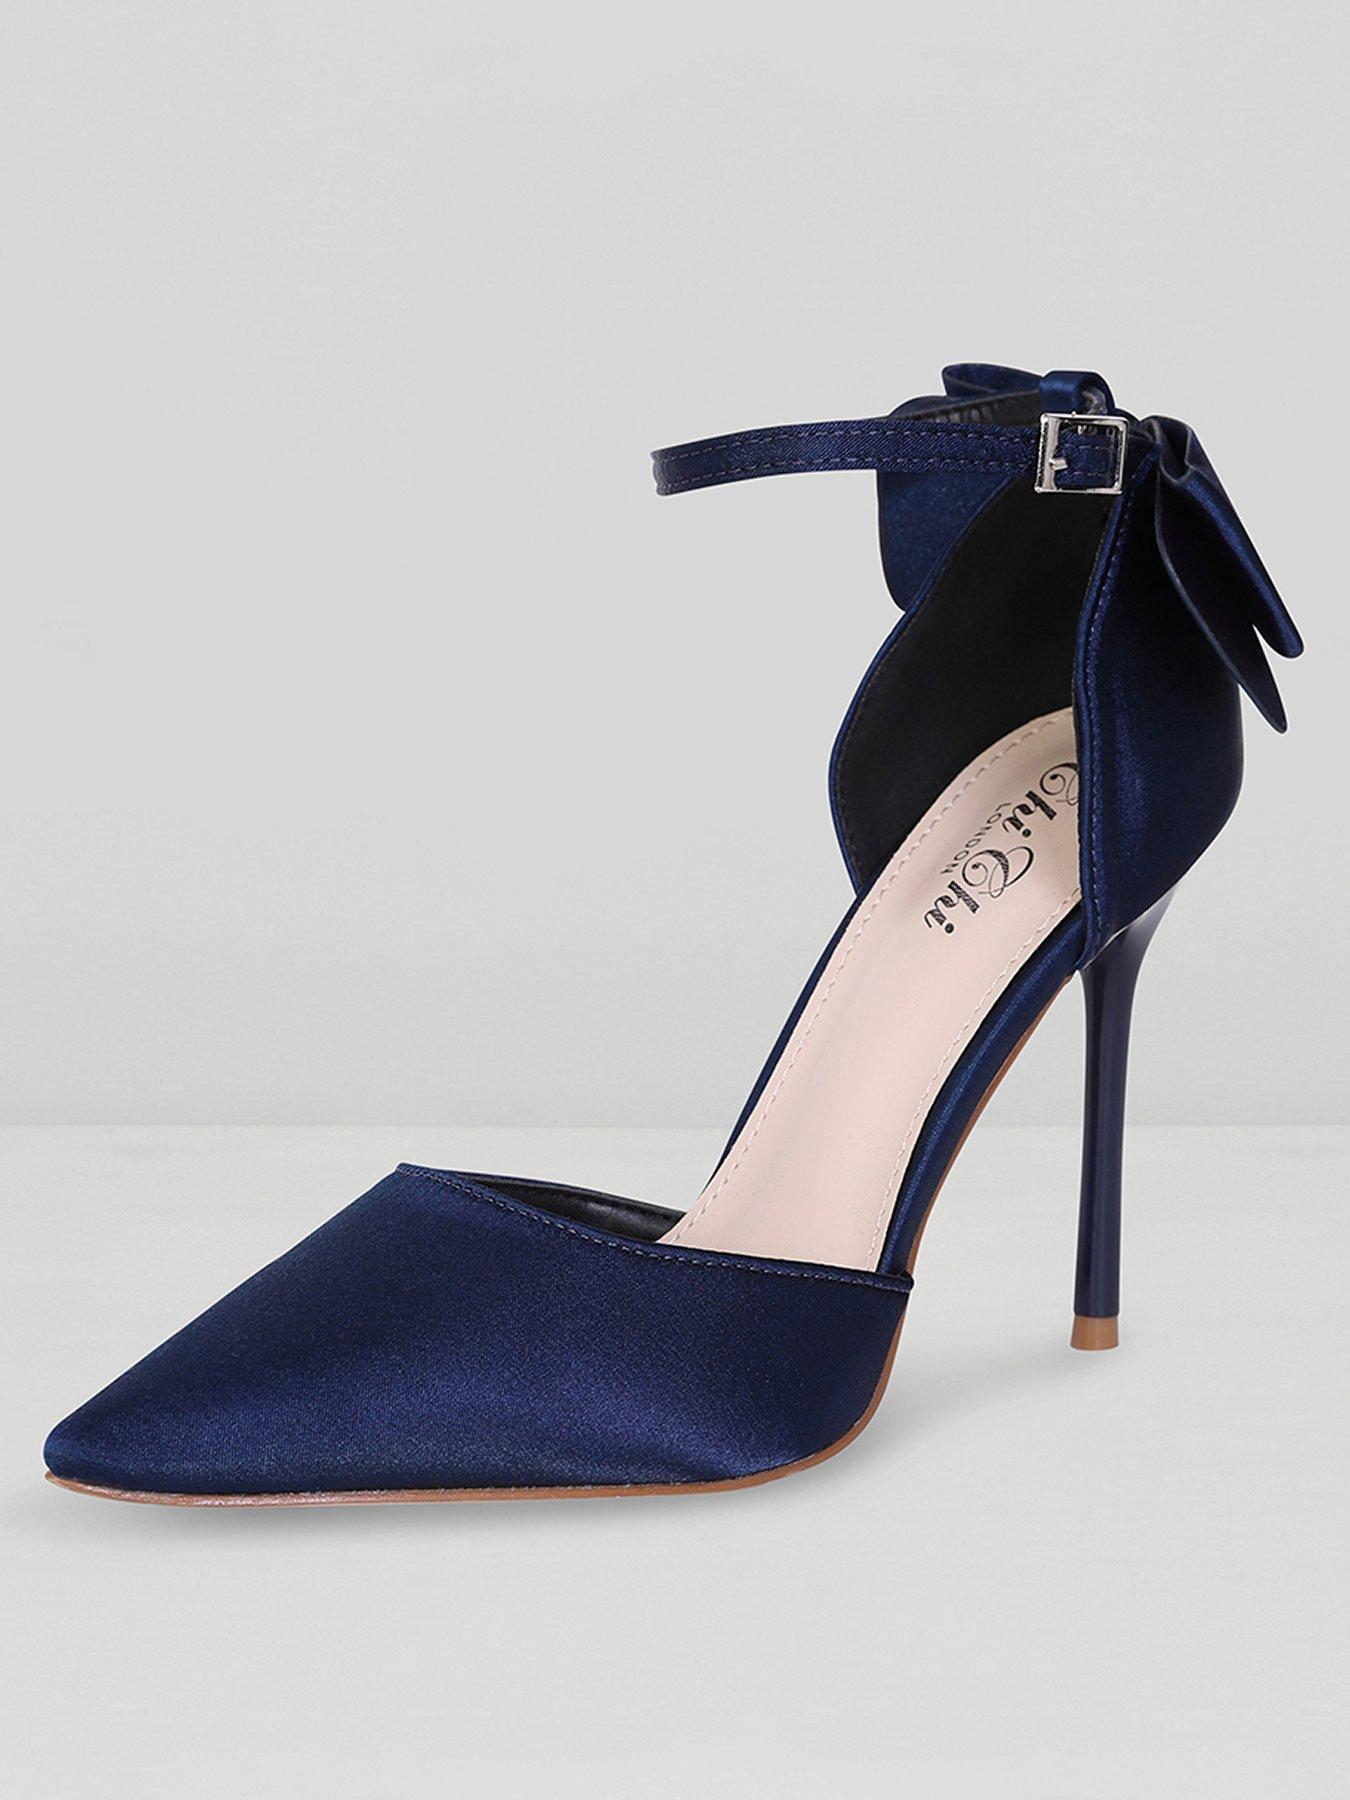 navy ankle strap shoes uk